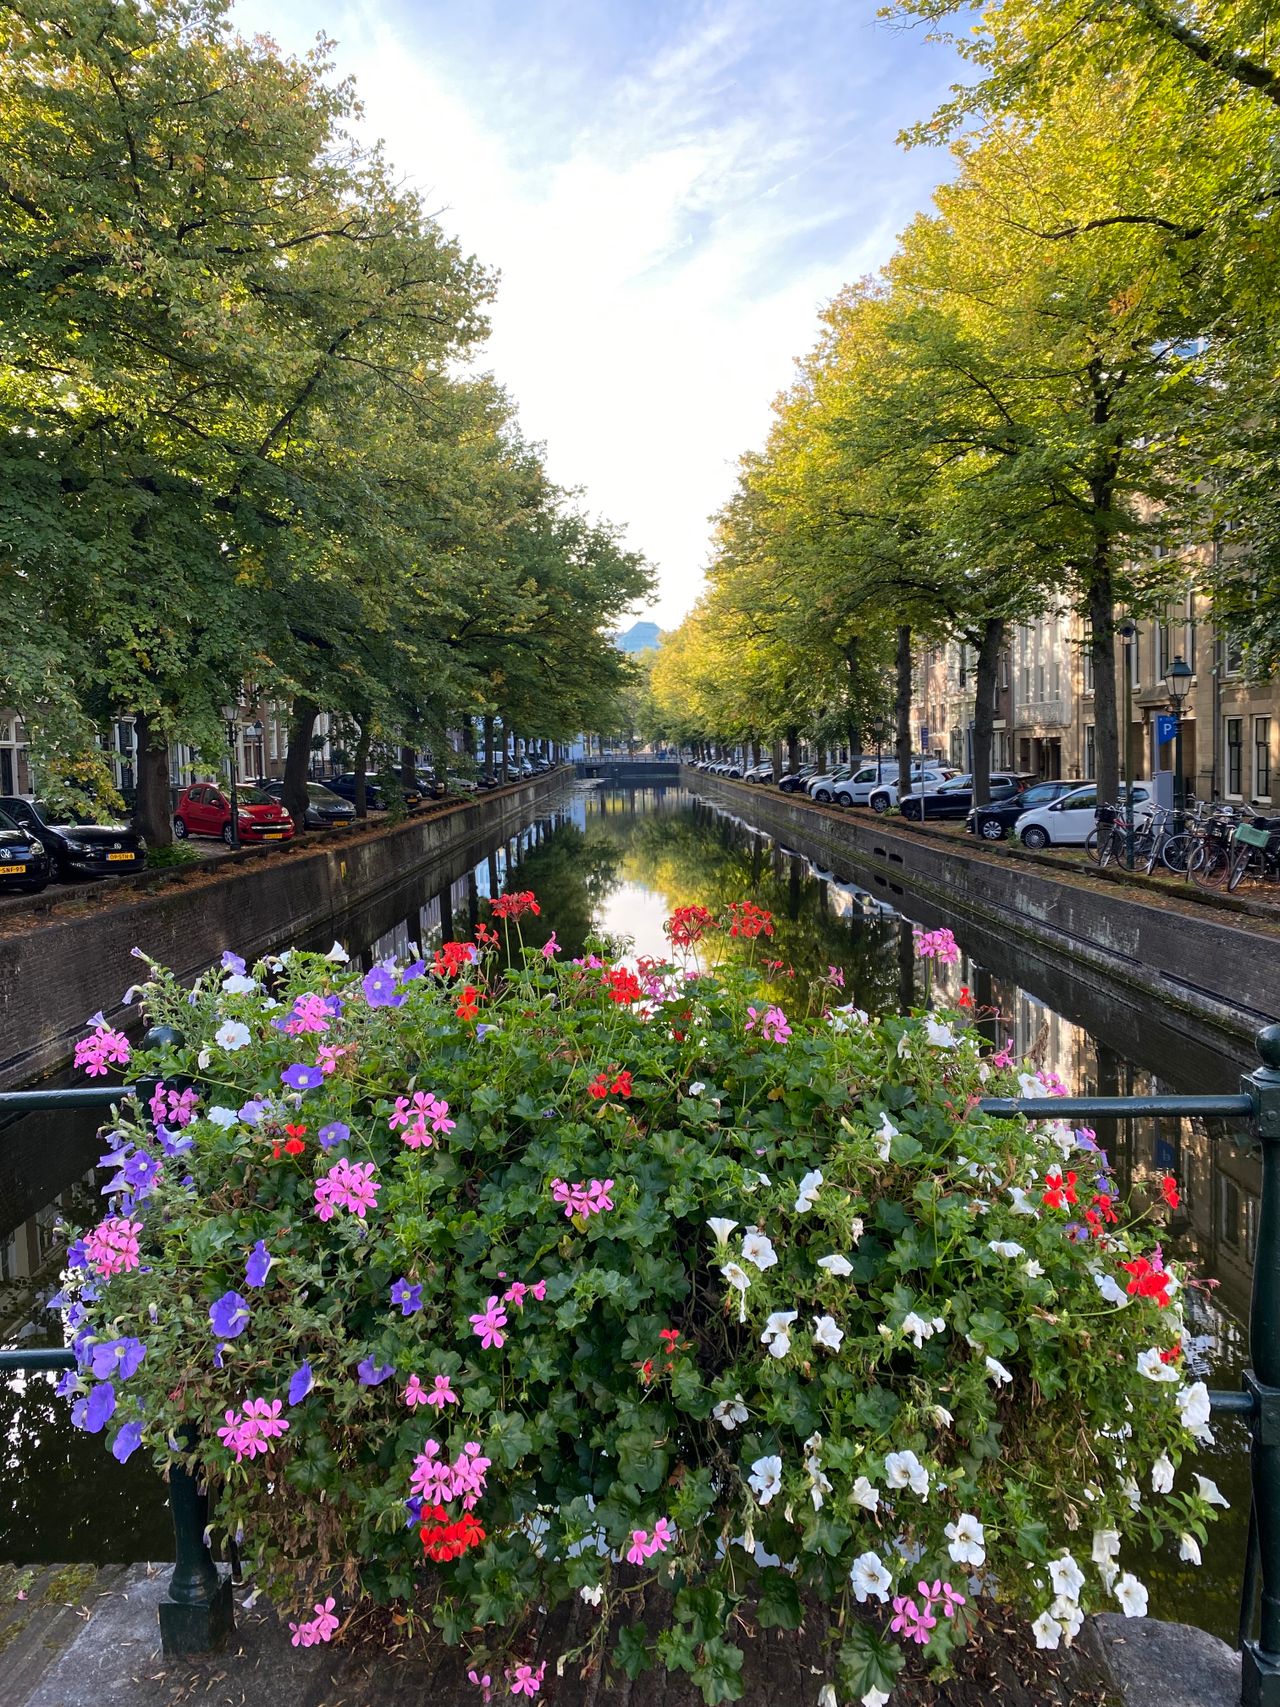 A flower bush in the foreground with a classic tree-lined Dutch canal in the background.